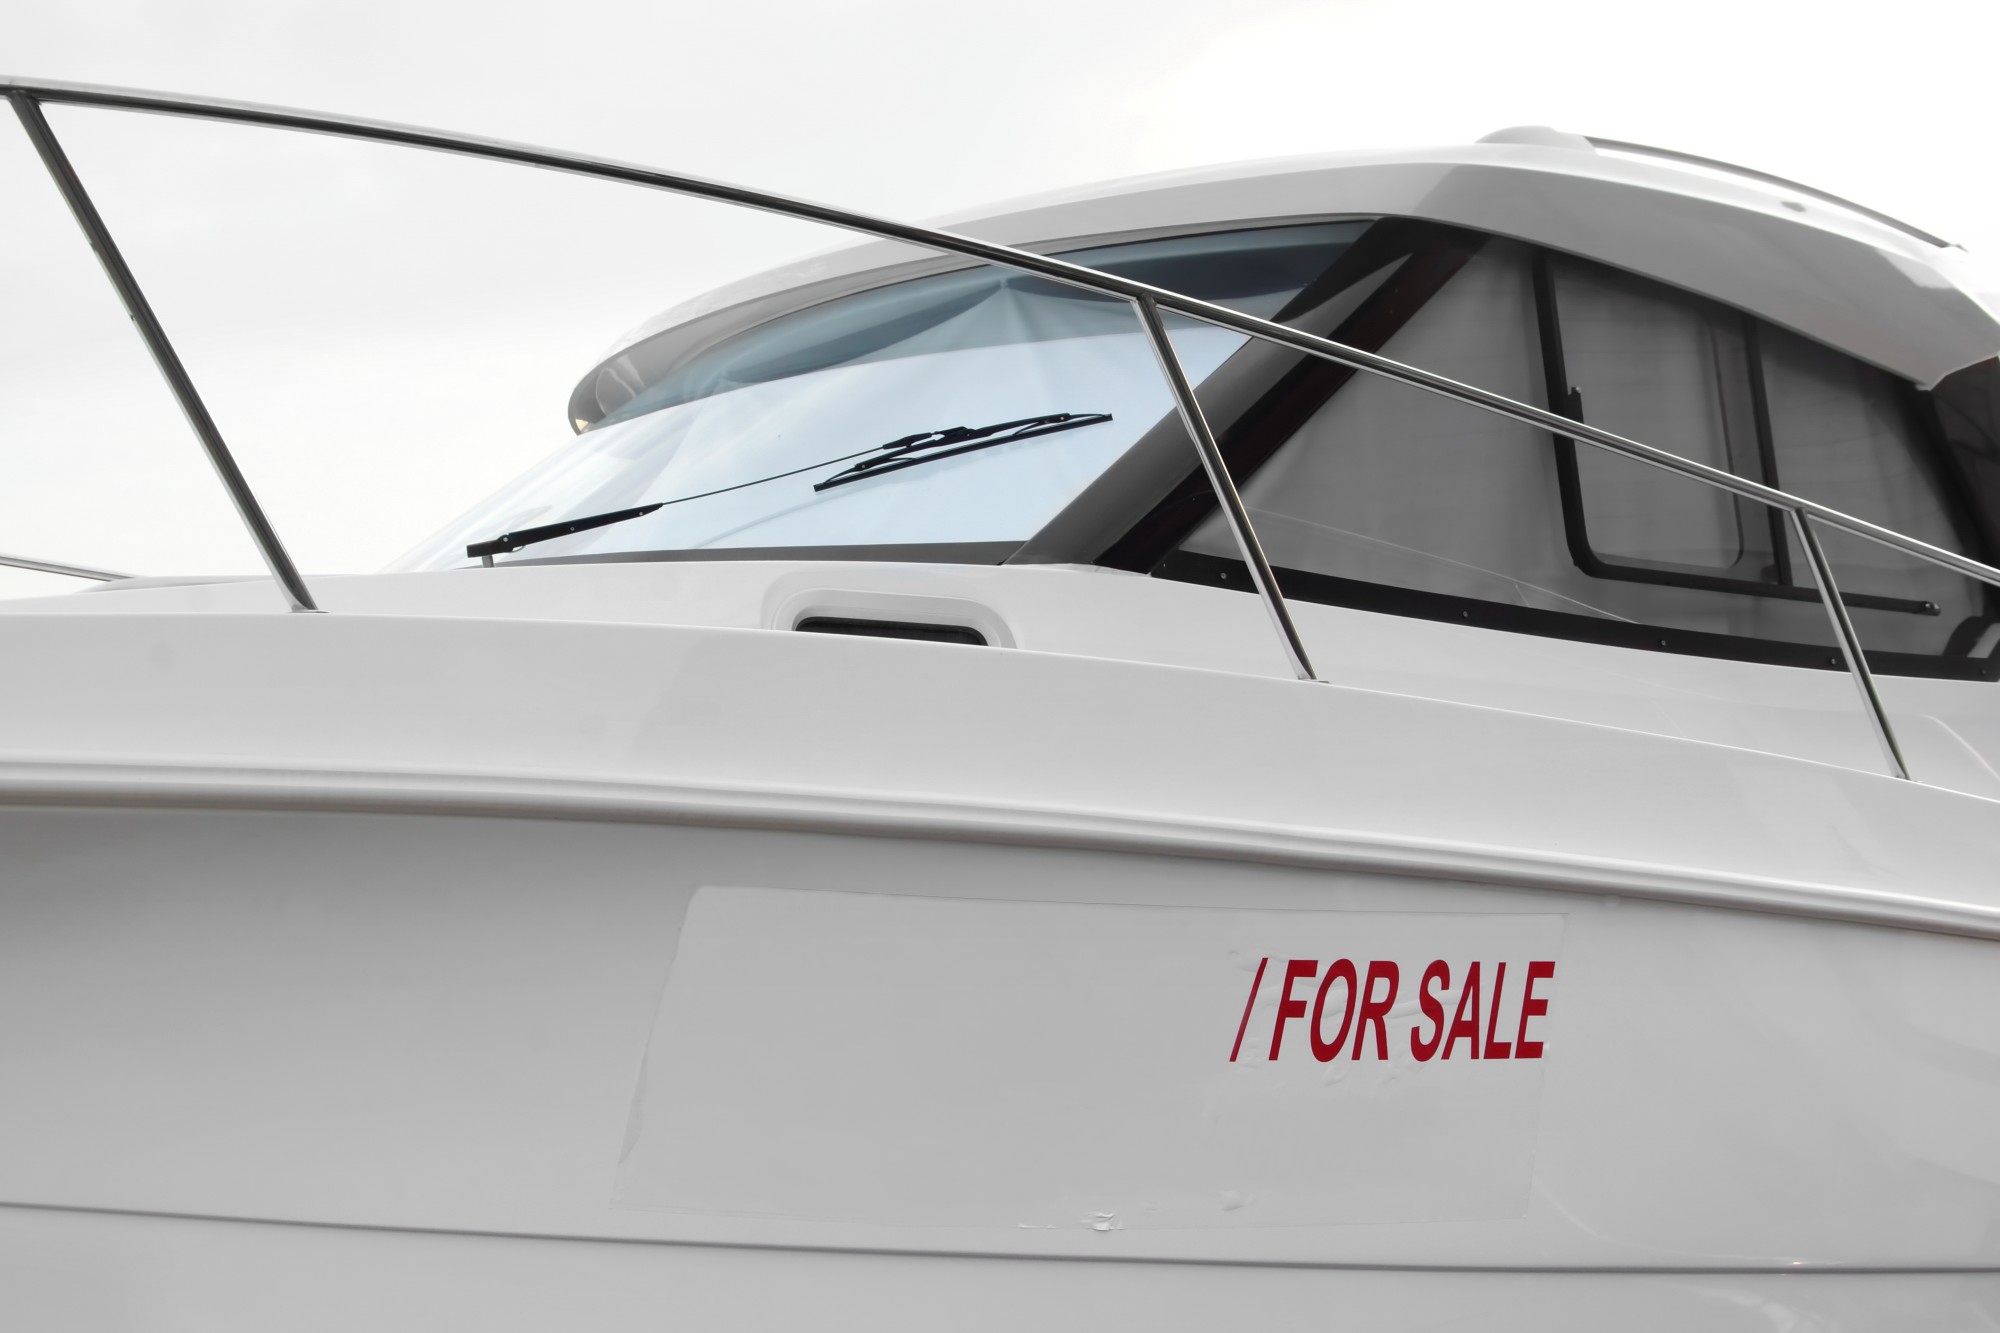 How to Buy a Boat: A Beginner's Guide